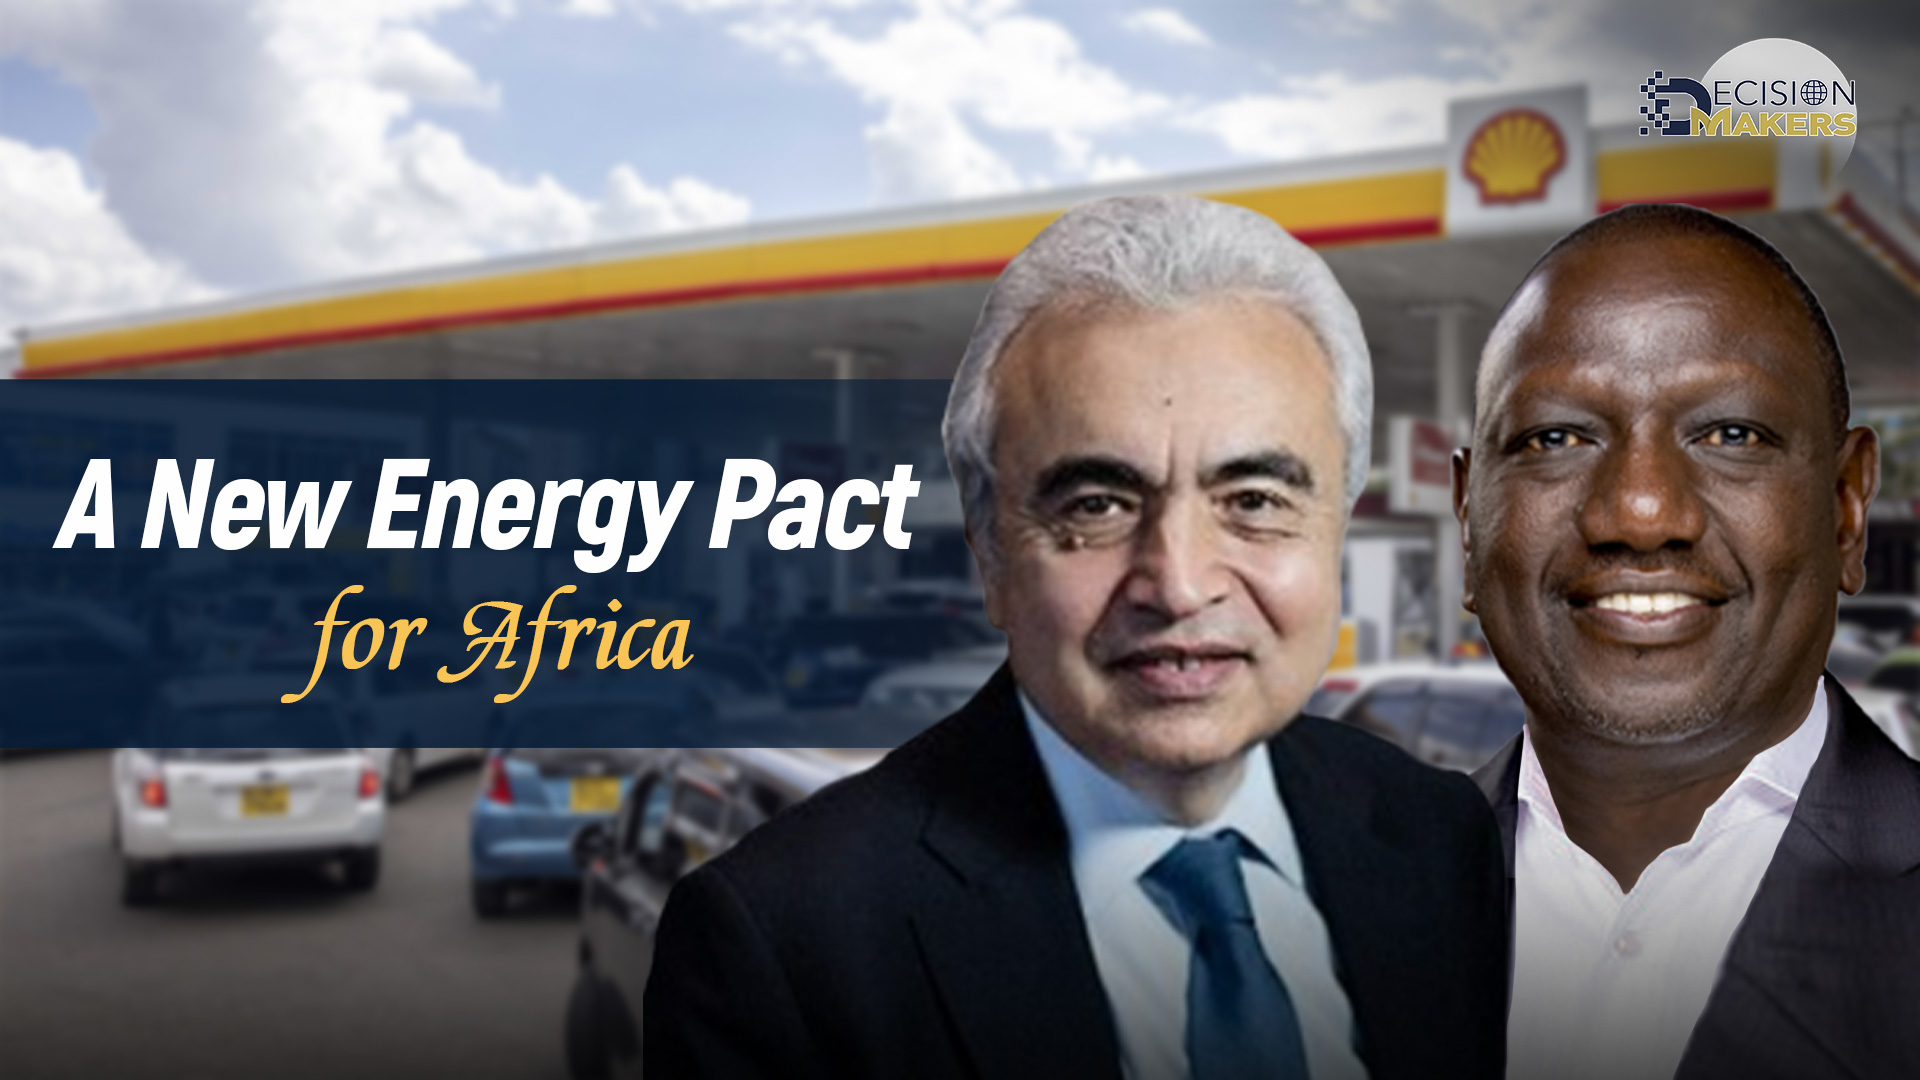 A new energy pact for Africa